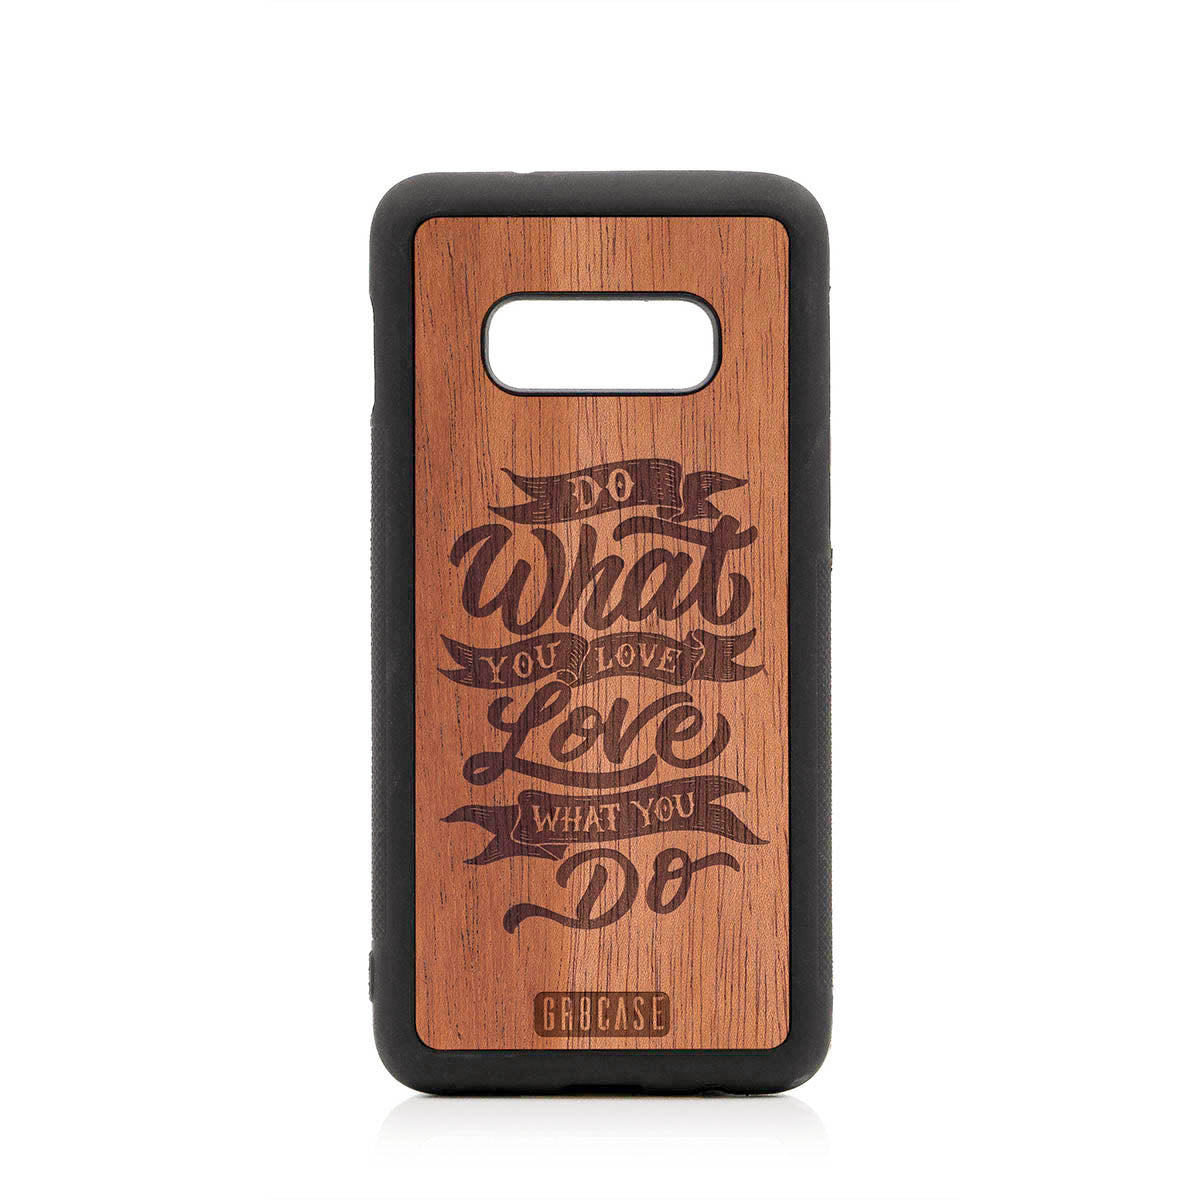 Do What You Love Love What You Do Design Wood Case For Samsung Galaxy S10E by GR8CASE